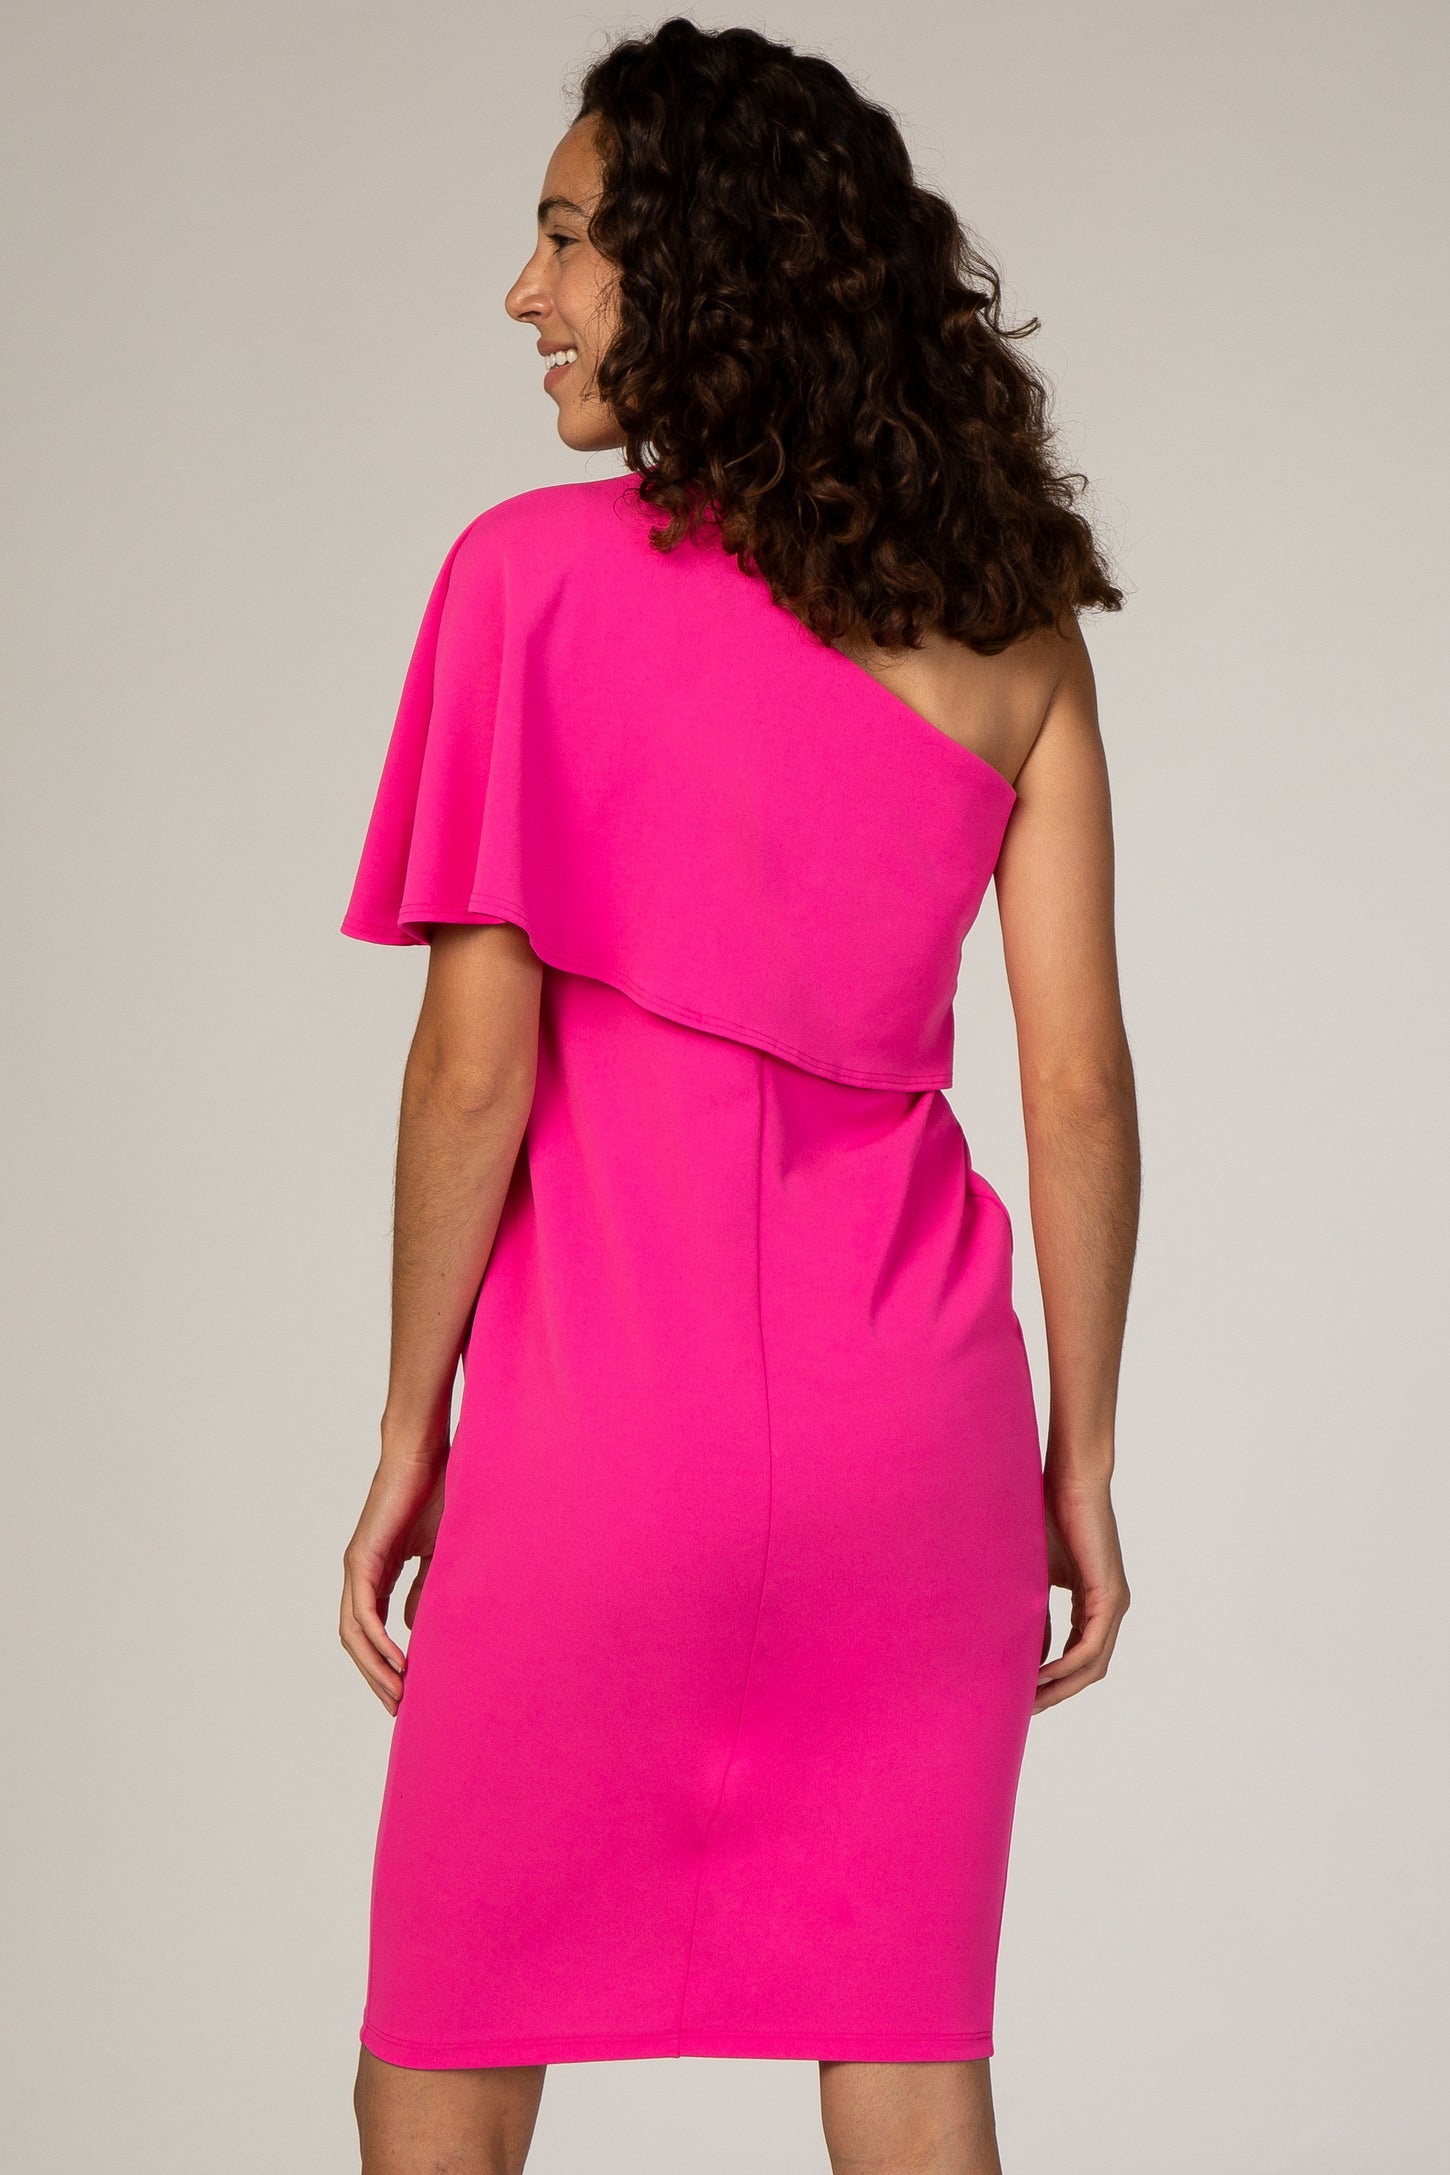 PinkBlush Fuchsia One Shoulder Overlay Fitted Dress